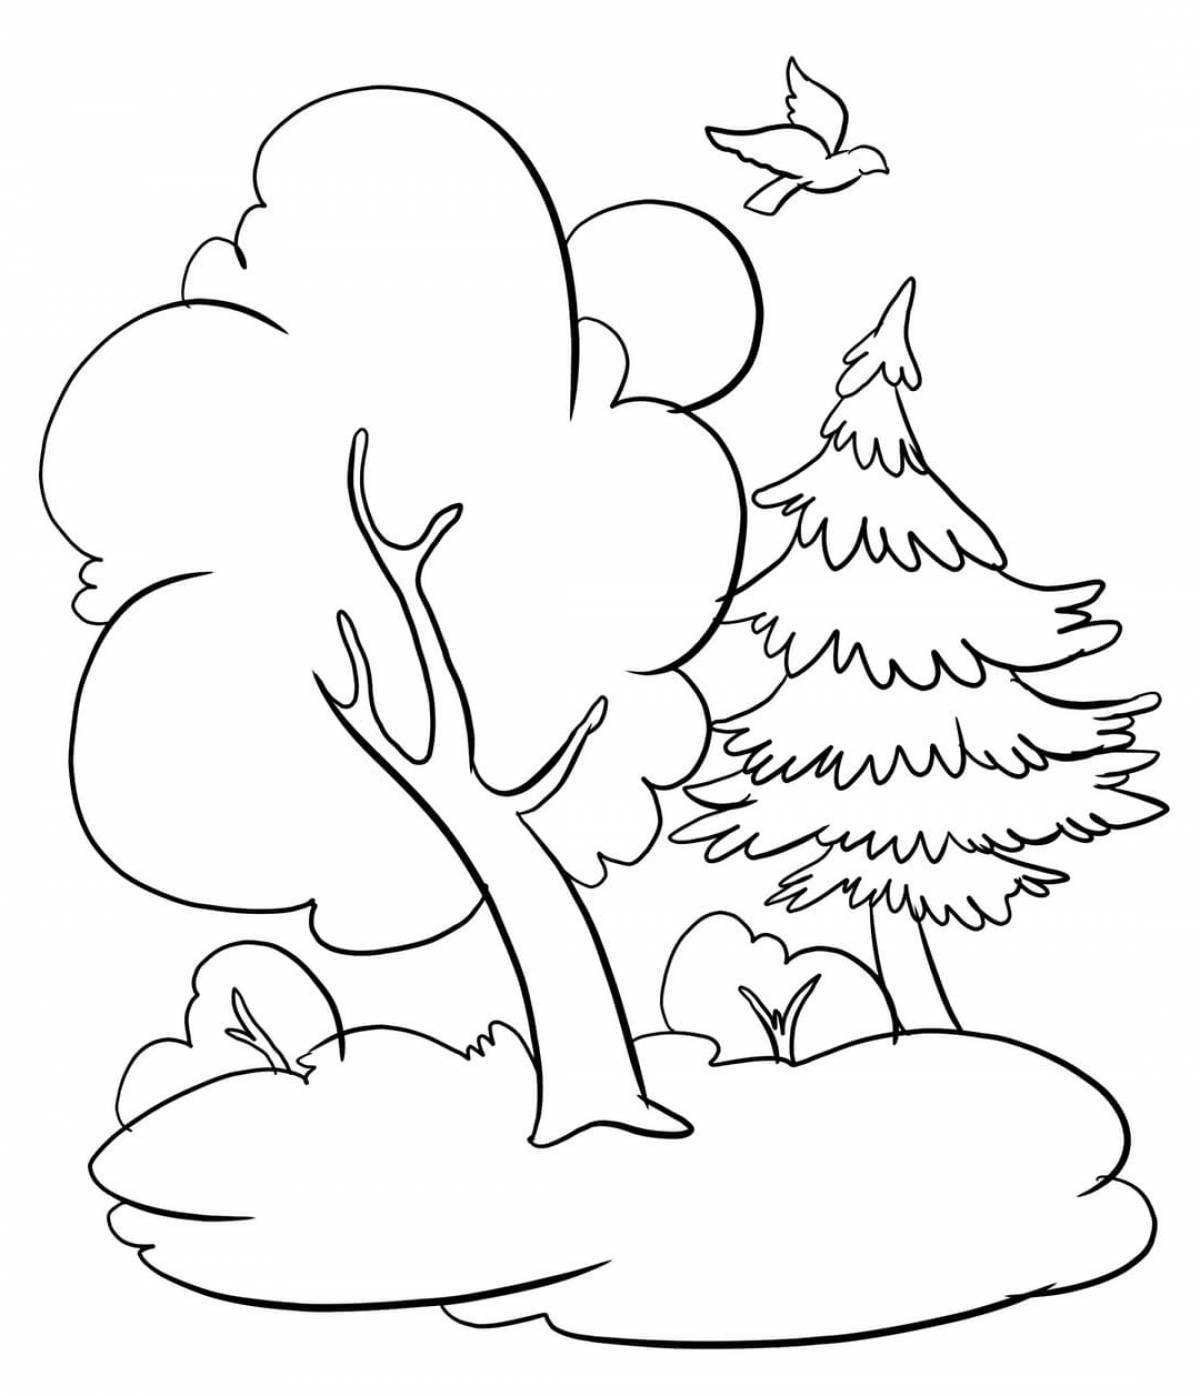 Colorful winter plants coloring page for kids